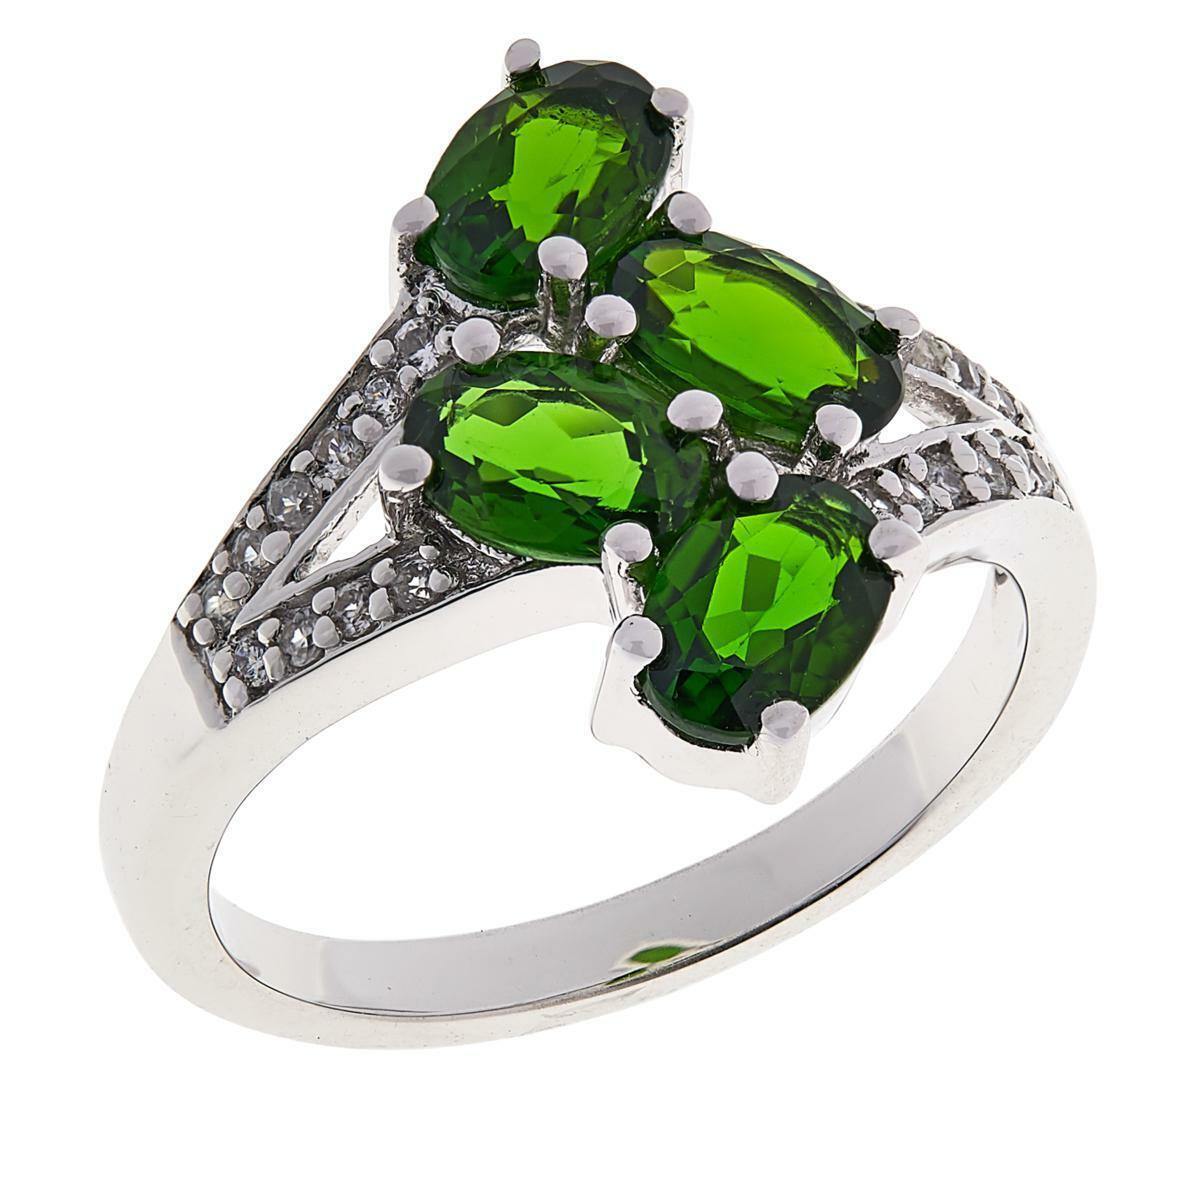 Colleen Lopez Sterling Silver Chrome Diopside & White Zircon Bypass Ring, Sz 7